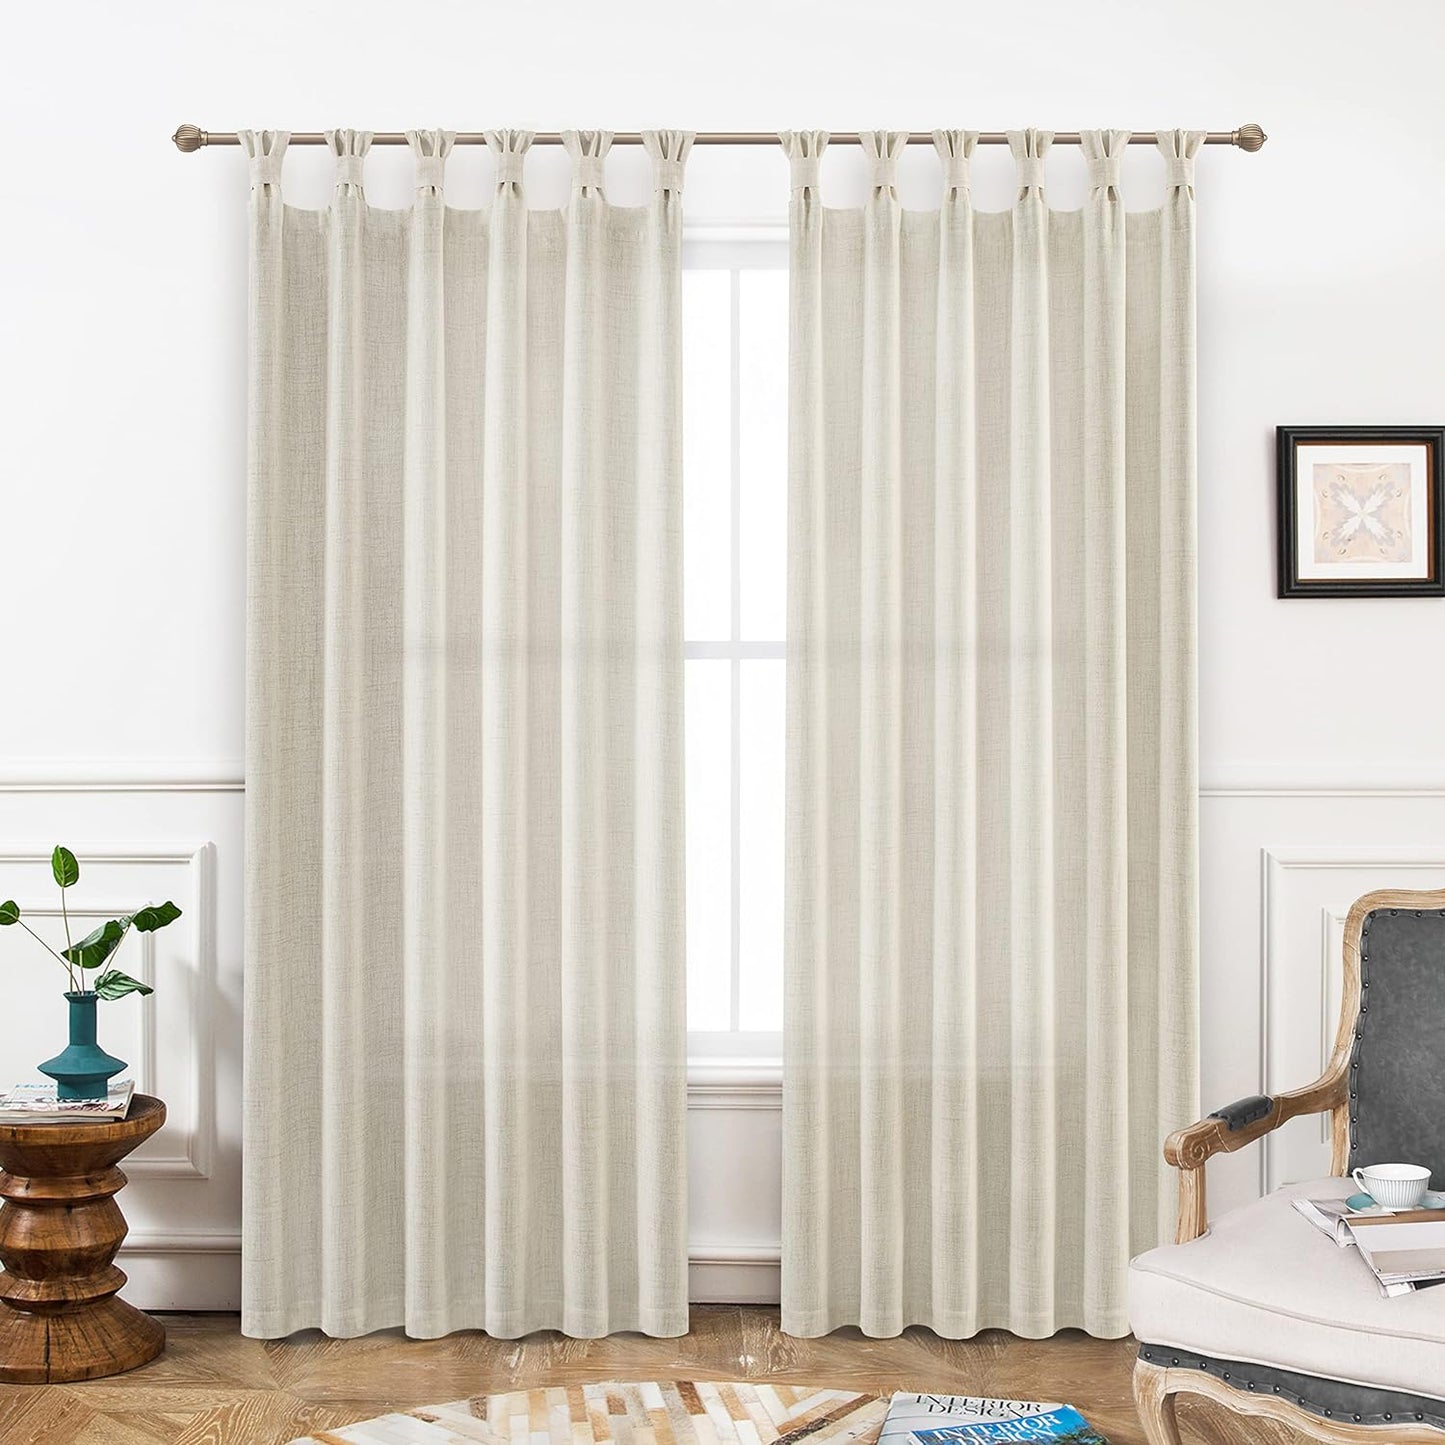 Driftaway Pinch Pleat Sheer Curtains 84 Inch Length 2 Panels Set Back Tab Sheer Vertical Drapes Privacy Added with Light Filtering for Bedroom Living Room Nursery Kids  DriftAway Twist Tab-Light Linen 52"X84" 